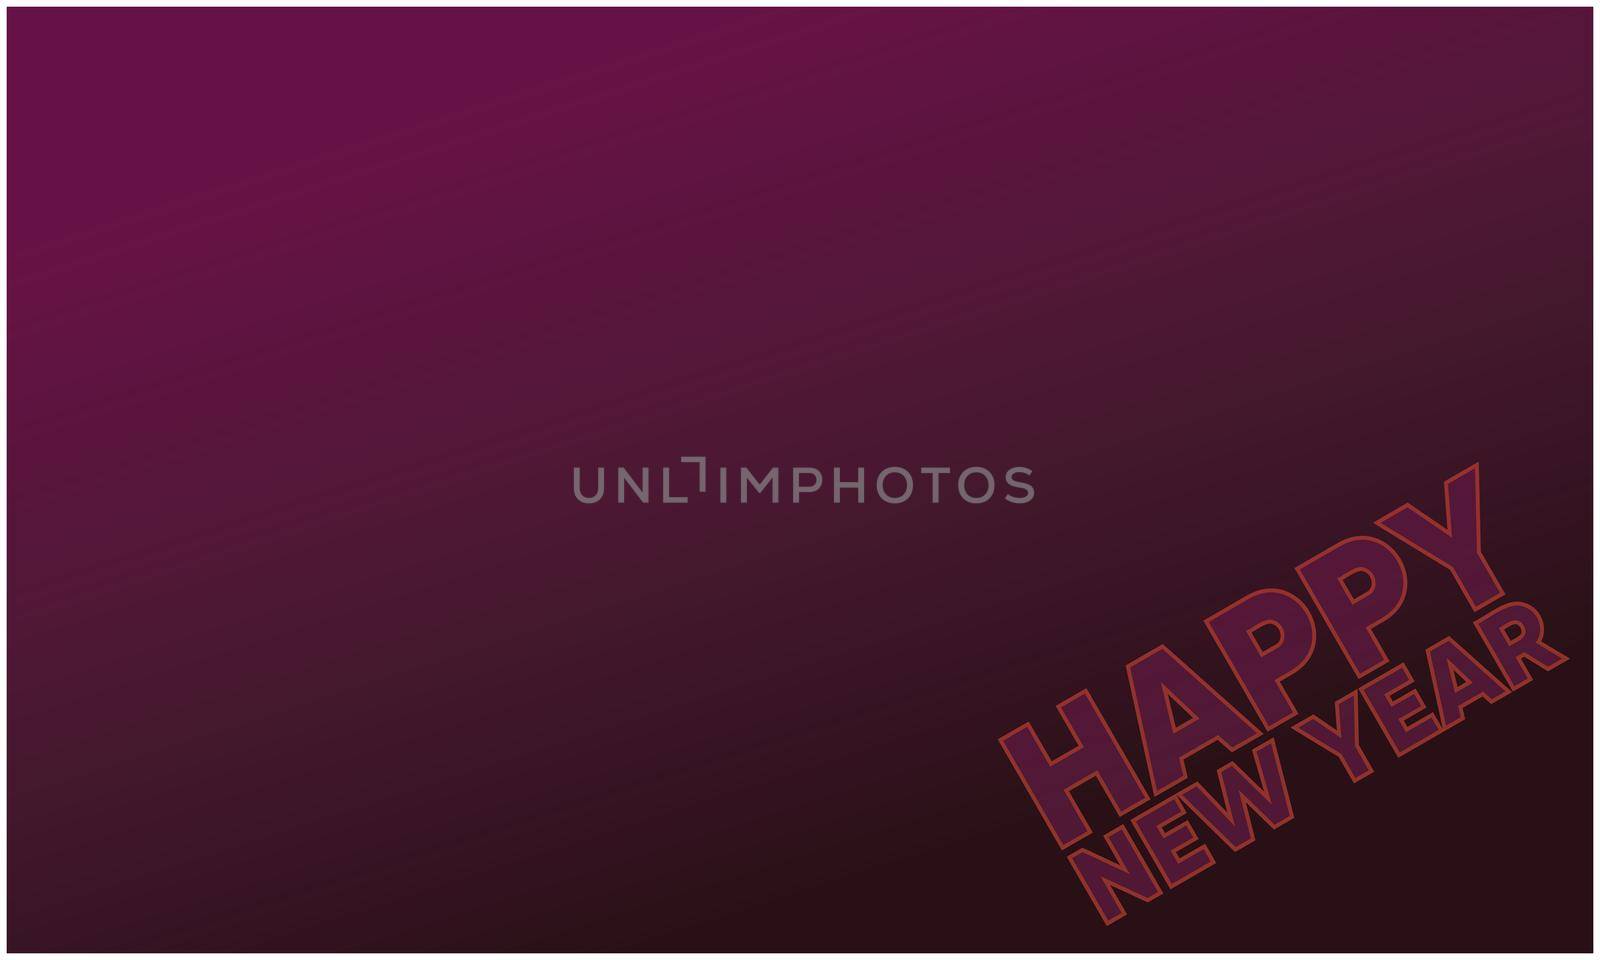 Happy New Year text effect on abstract dark Background by aanavcreationsplus